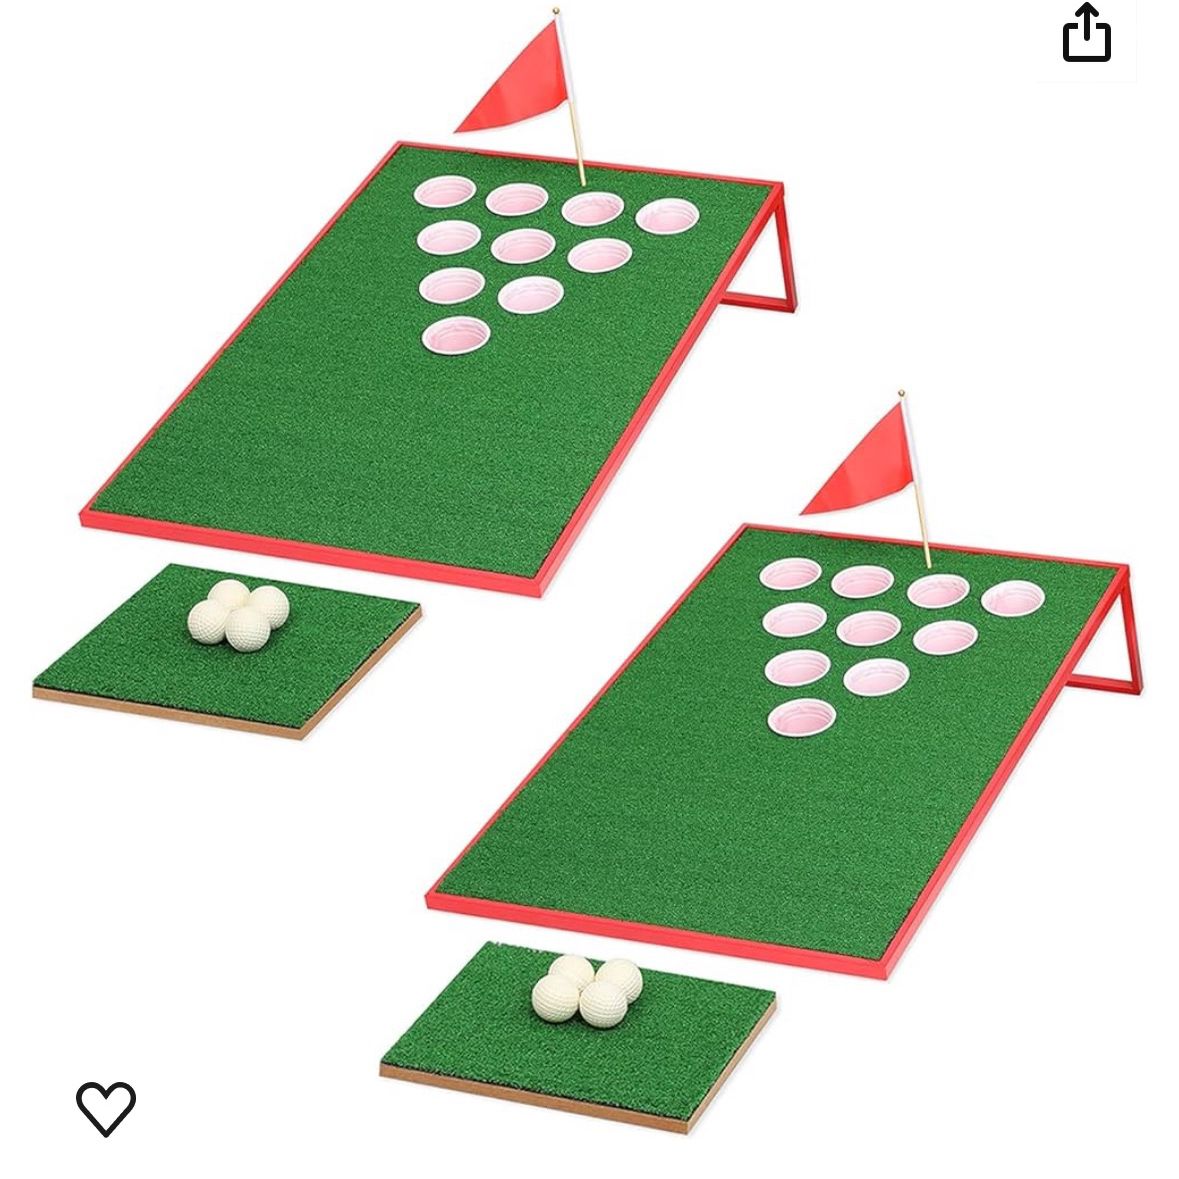 SPRAWL Golf Pong Cornhole Set Exciting Golf Chipping Game Pong Chip Shot Game for Tailgate Beach Backyard Man Cave